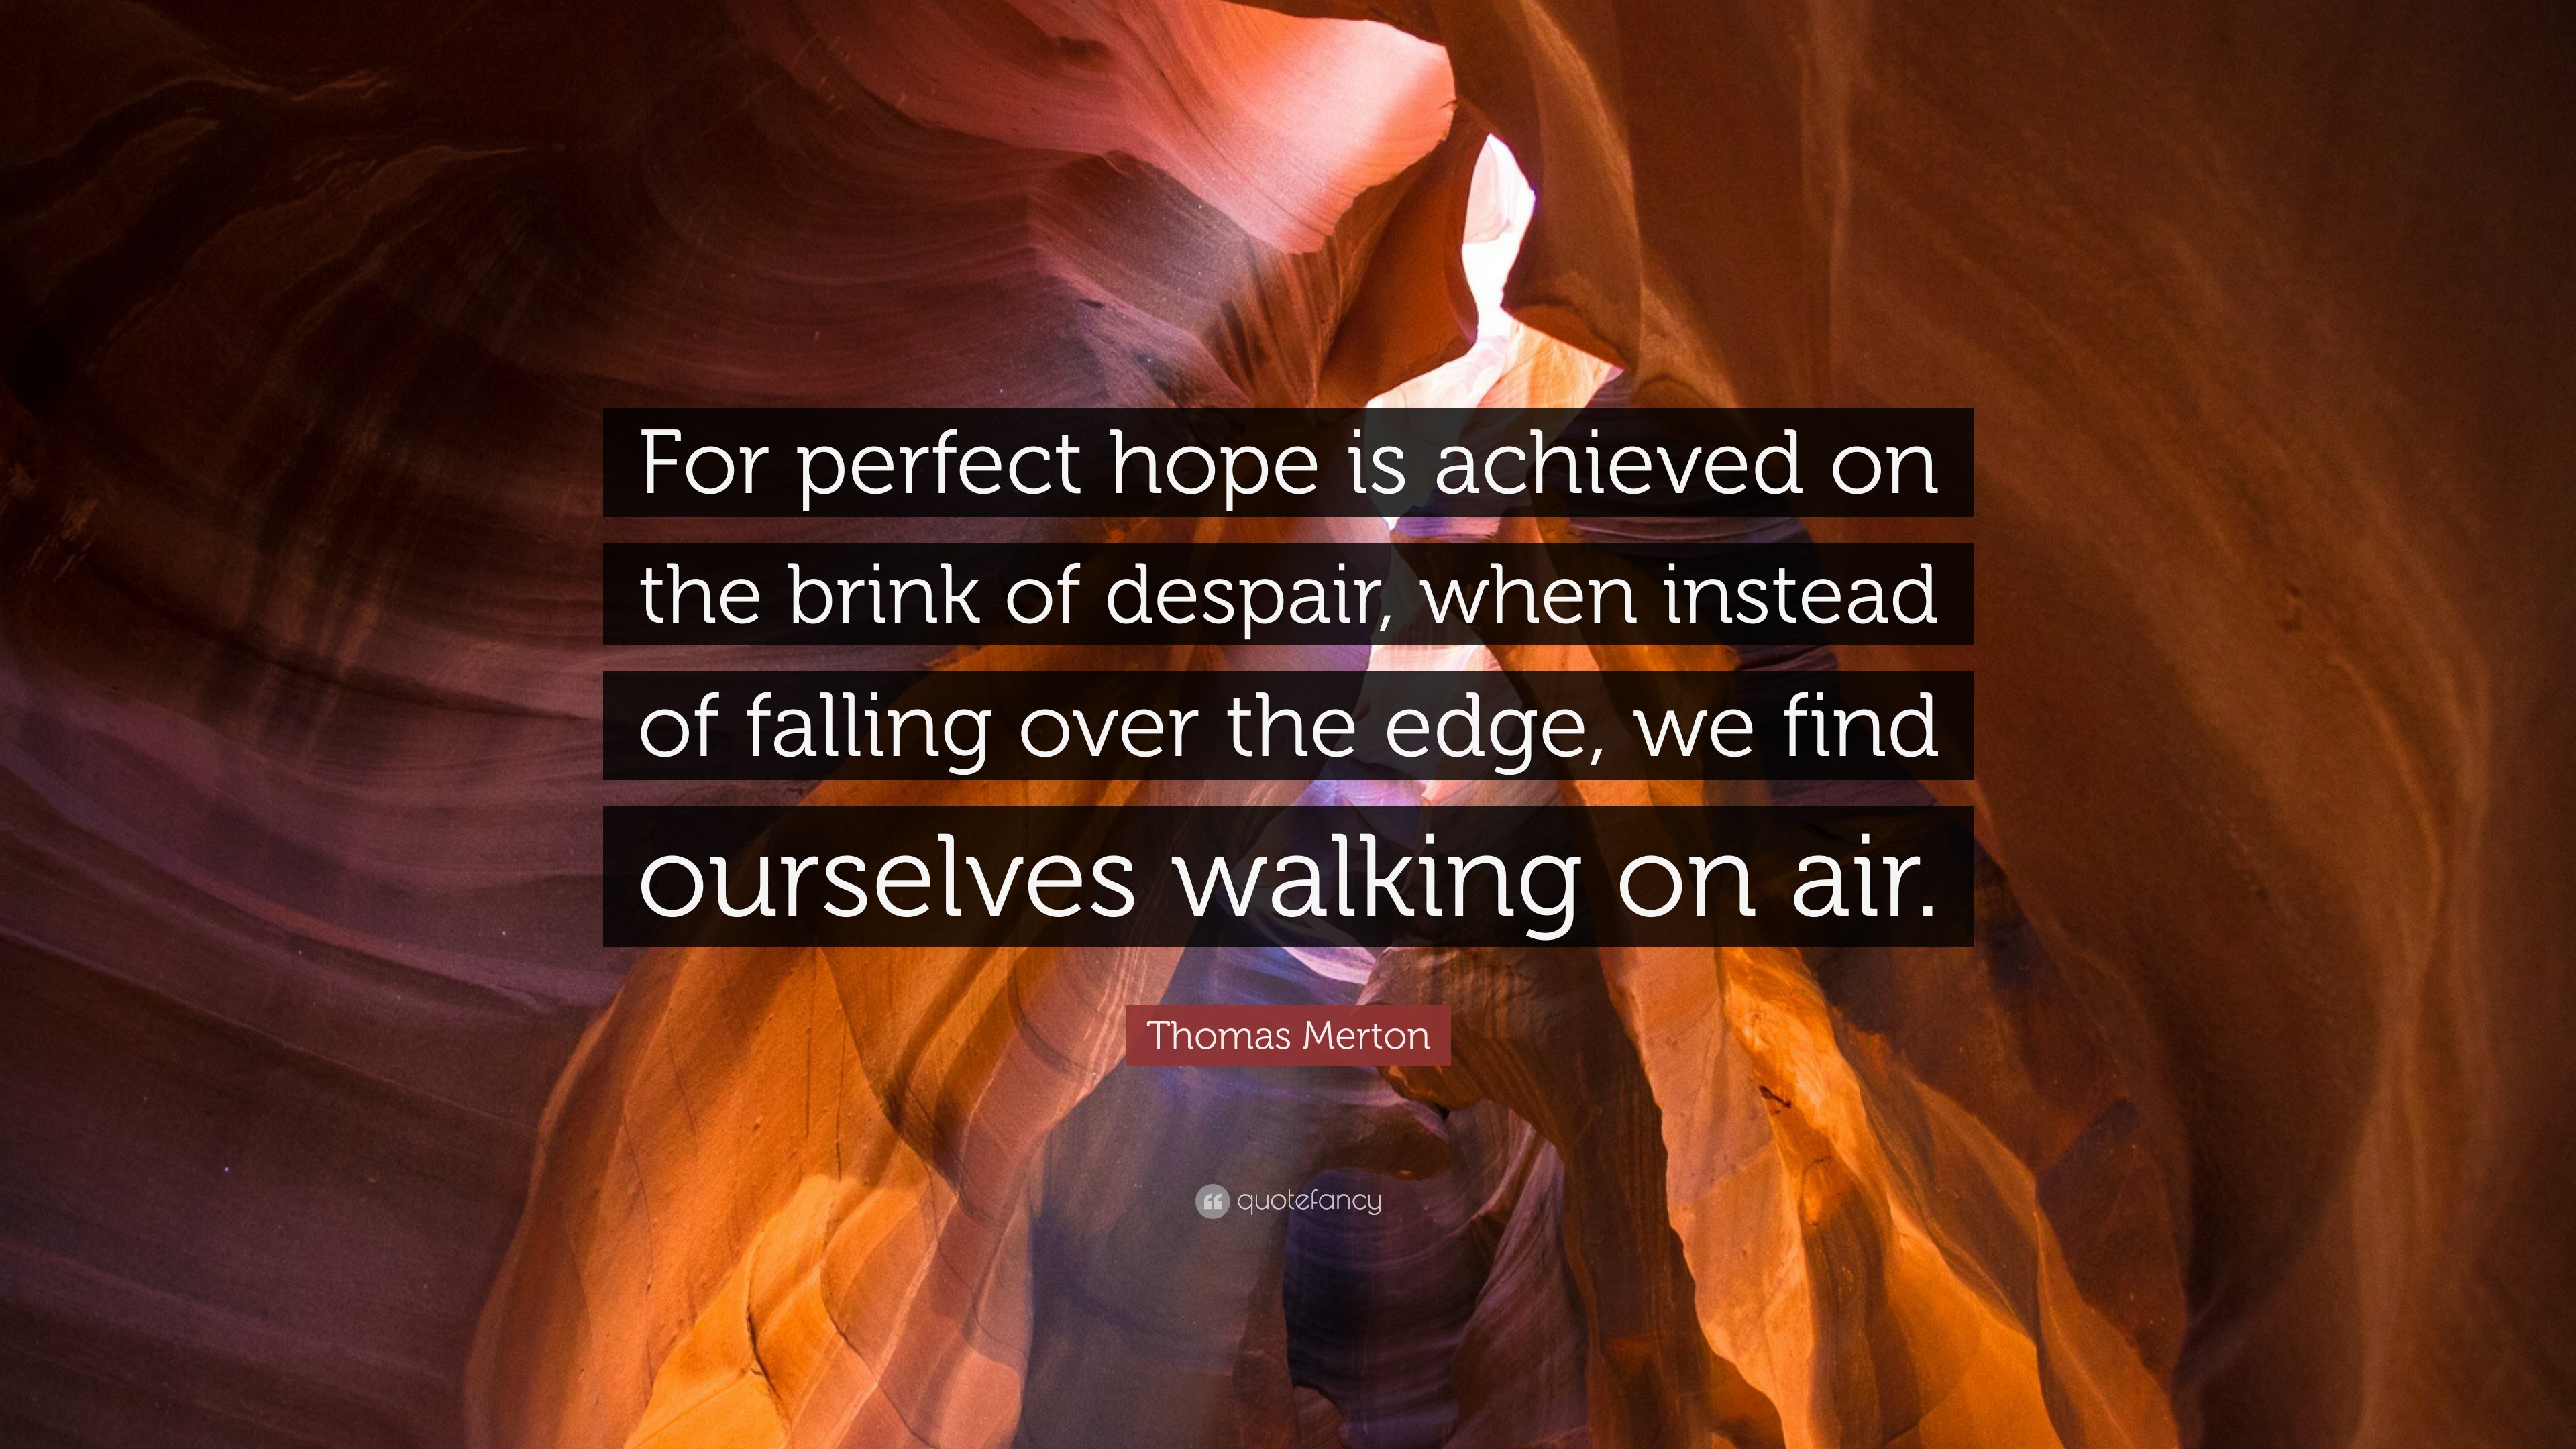 2252473 Thomas Merton Quote For perfect hope is achieved on the brink of